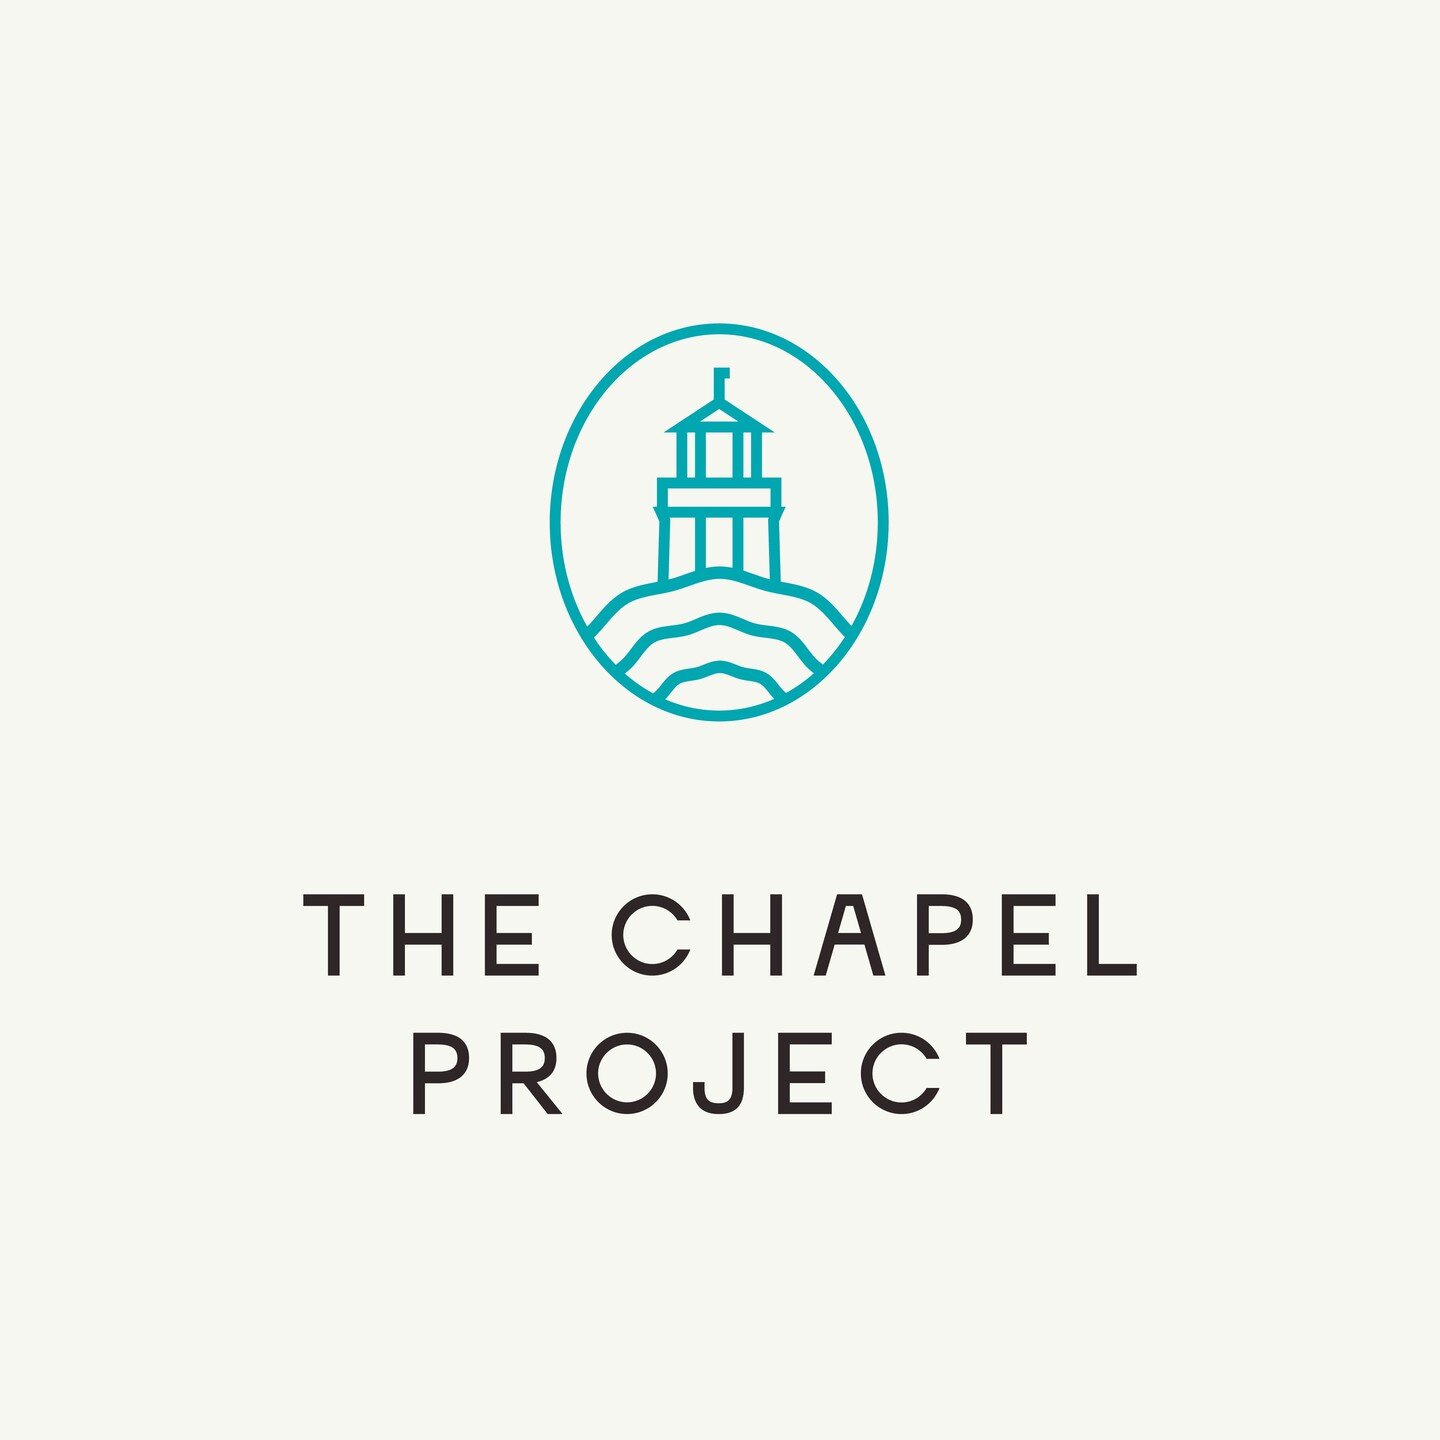 Another fun branding project that was a good challenge, this time for the renovation of Gwithian chapel into a community space - The Chapel Project.

The branding has a modern and playful feel that fits the new intended audience while hinting at the 